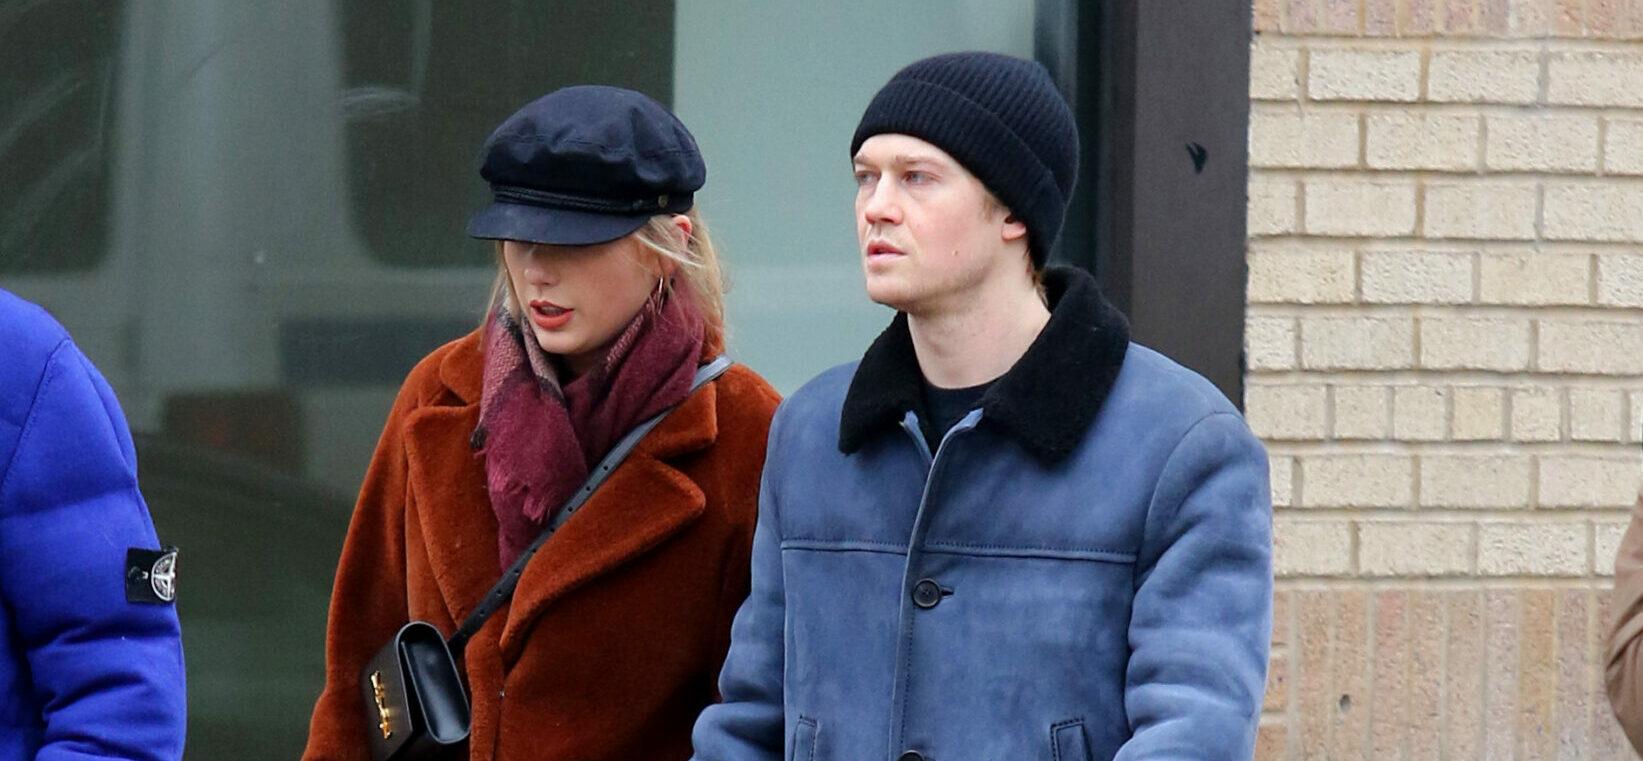 Taylor Swift and Joe Alwyn Reportedly Couldn’t Overcome ‘Rough Patches’ In Relationship